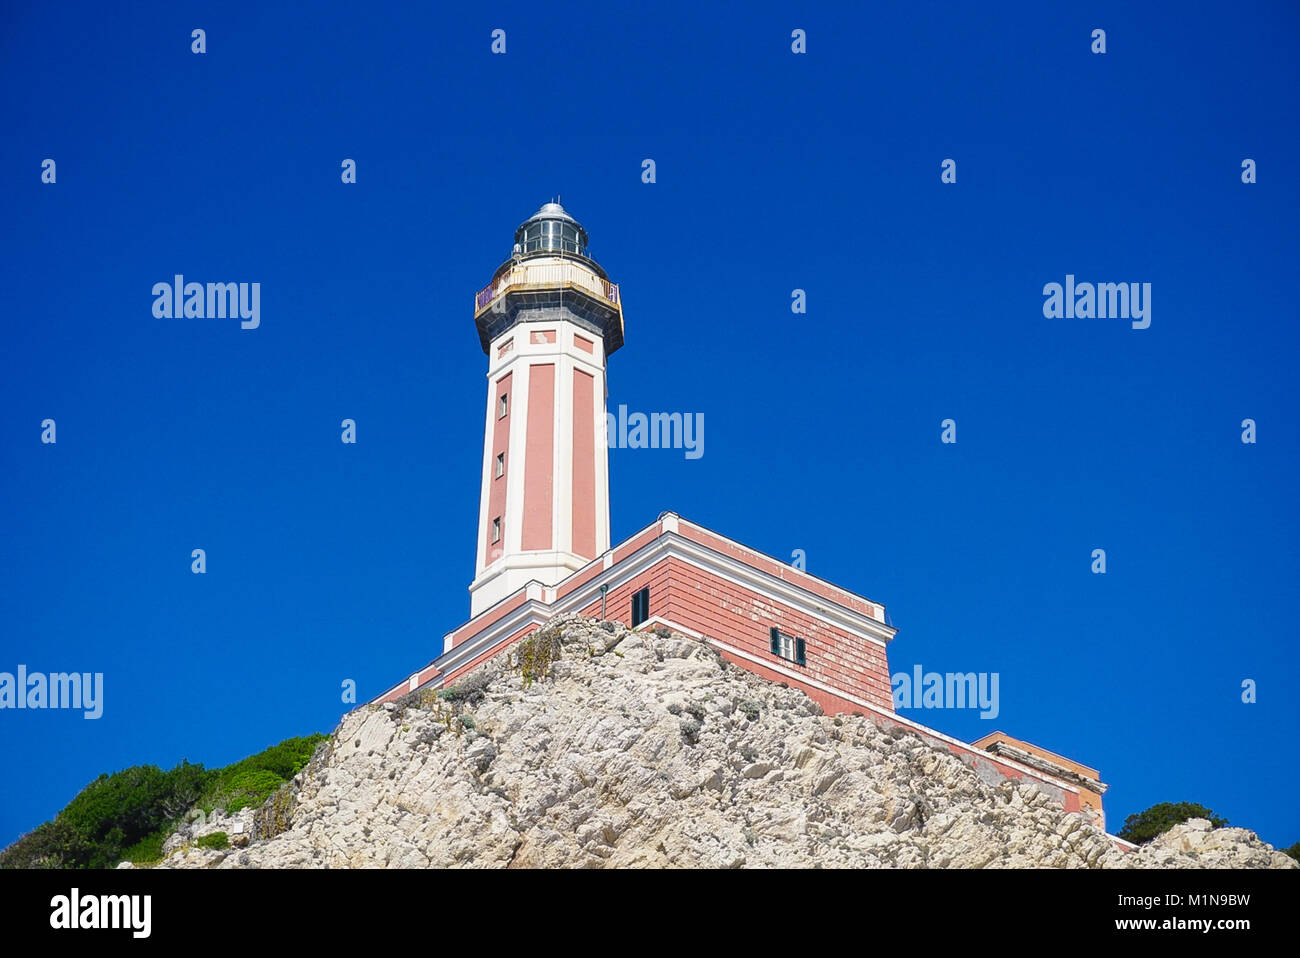 The Lighthouse on the cliff at Punta Carena on the island of Capri, Italy Stock Photo